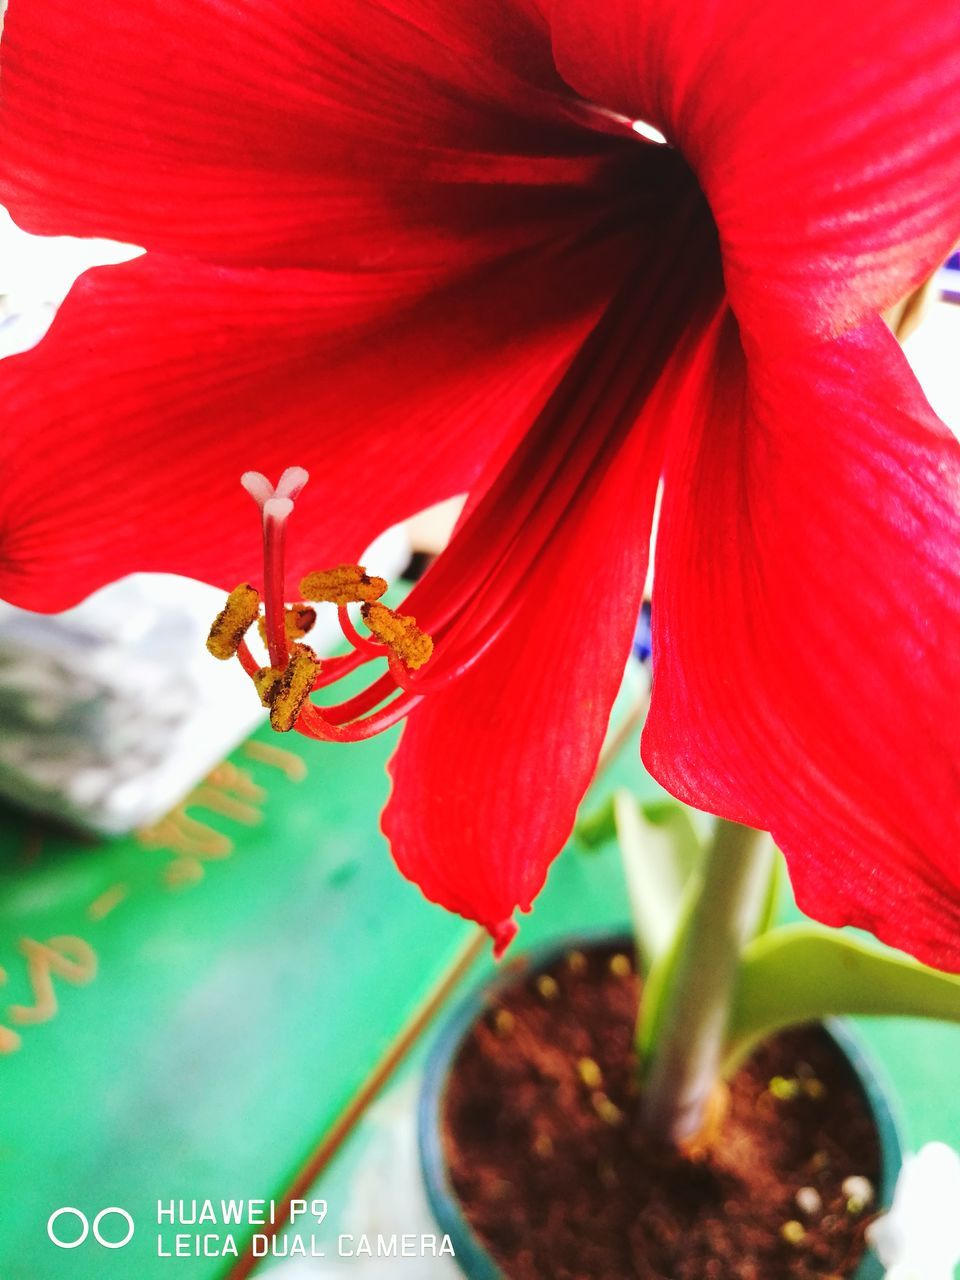 CLOSE-UP OF RED FLOWER AND PLANT